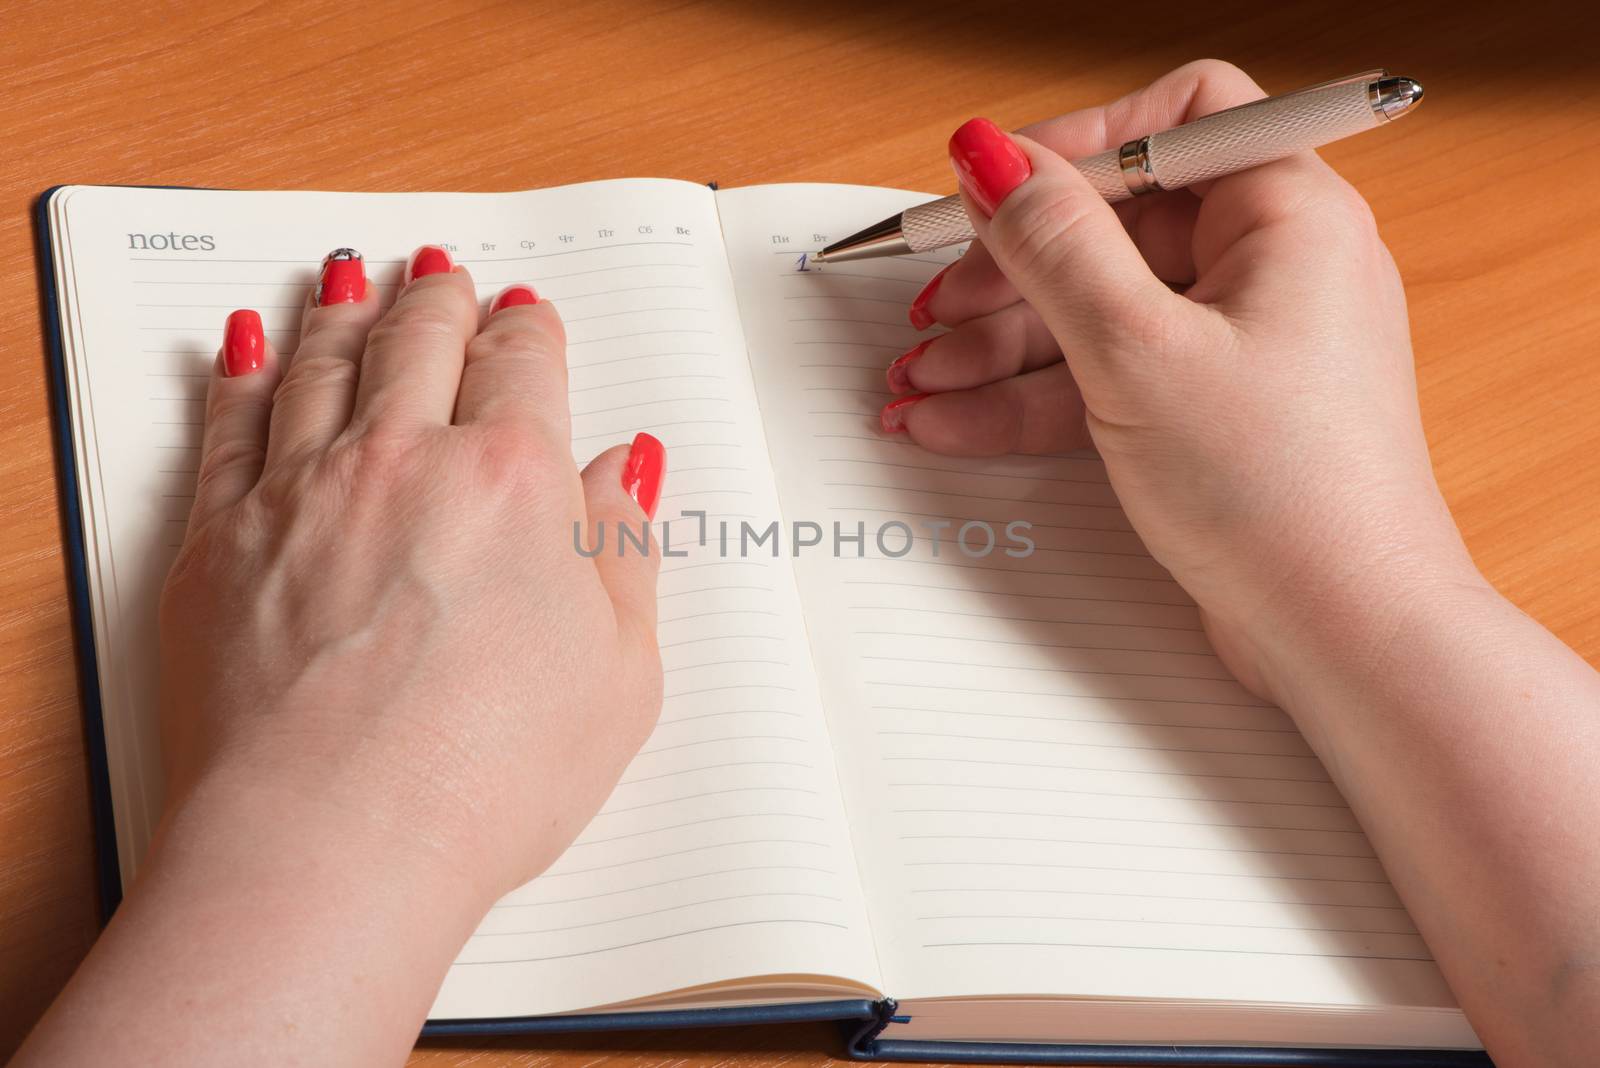 Female hands with manicure over pages of a notebook hold a pen